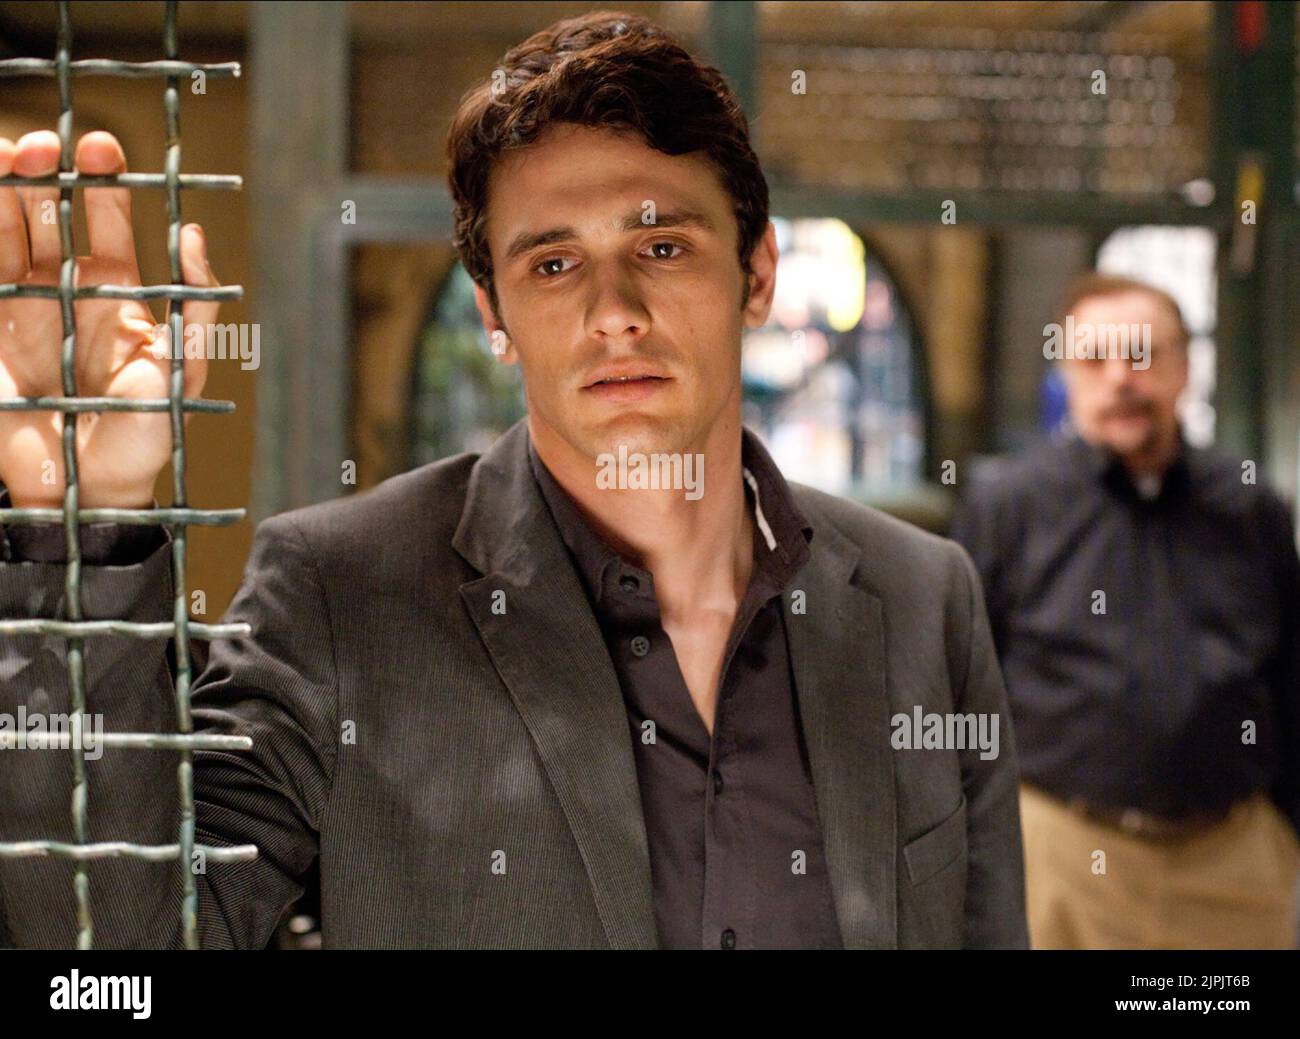 JAMES FRANCO, RISE OF THE PLANET OF THE APES, 2011 Stock Photo